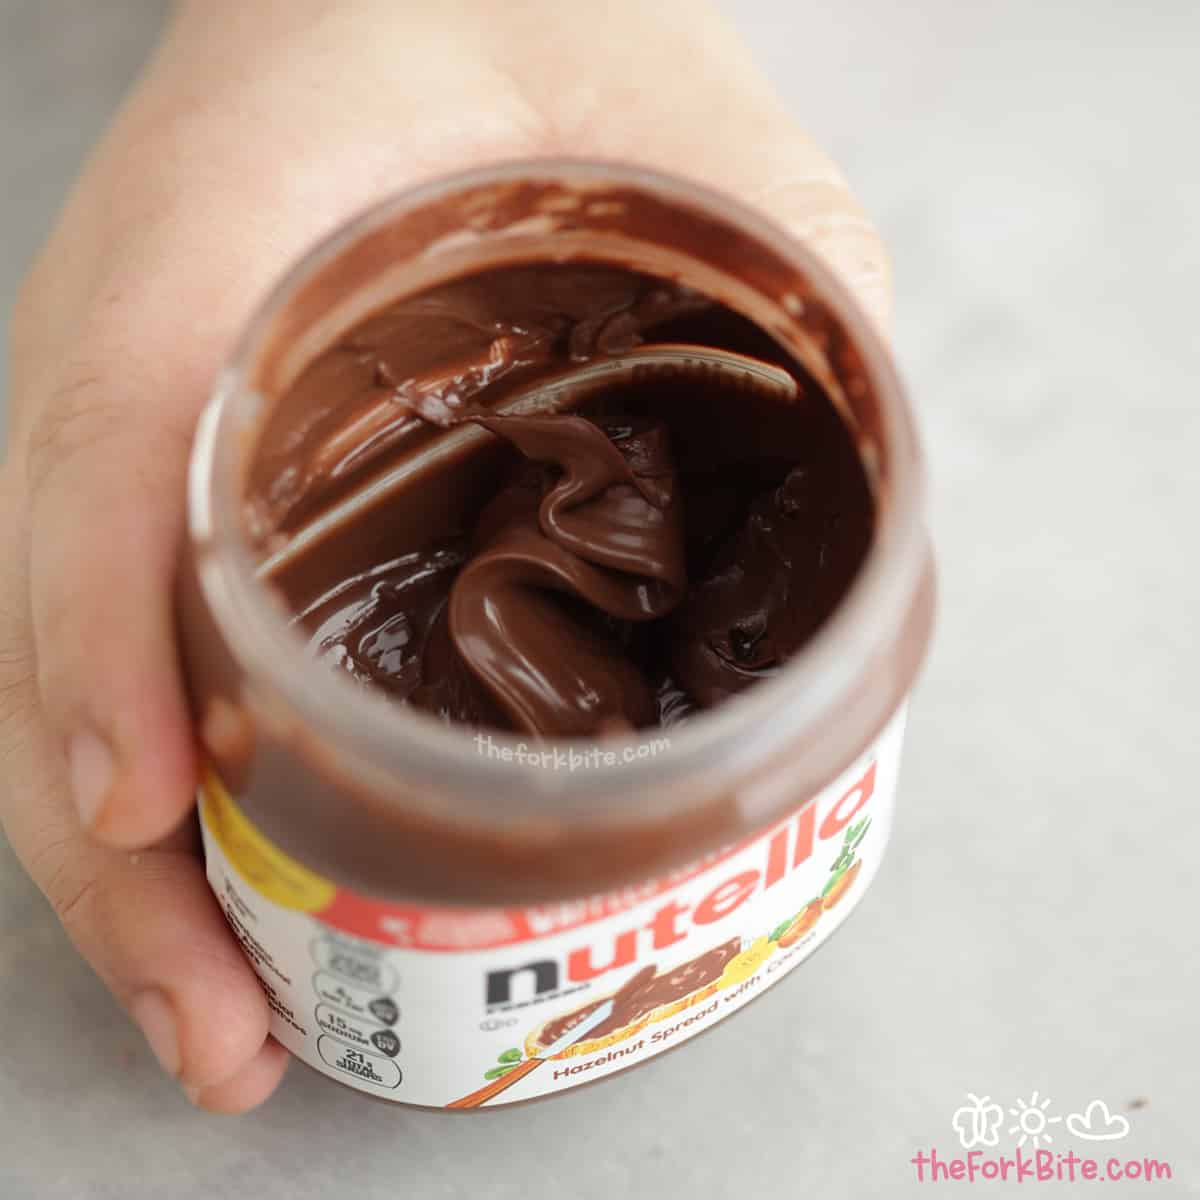 The main reason why Nutella doesn't go bad is because of its ingredients. The high sugar content also makes it difficult for bacteria to grow, making Nutella more resistant to spoilage.